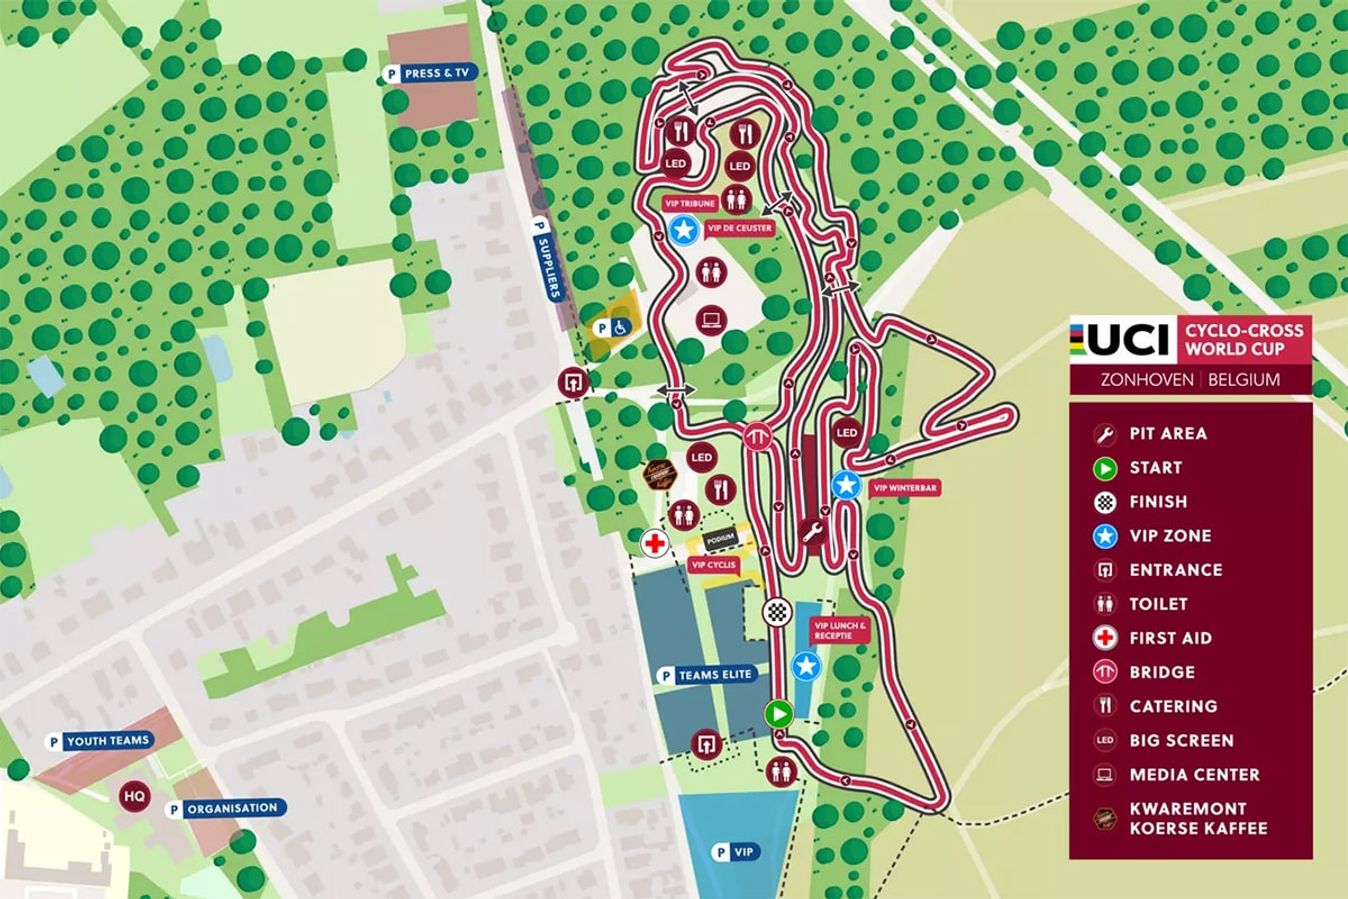 The course in Zonhoven